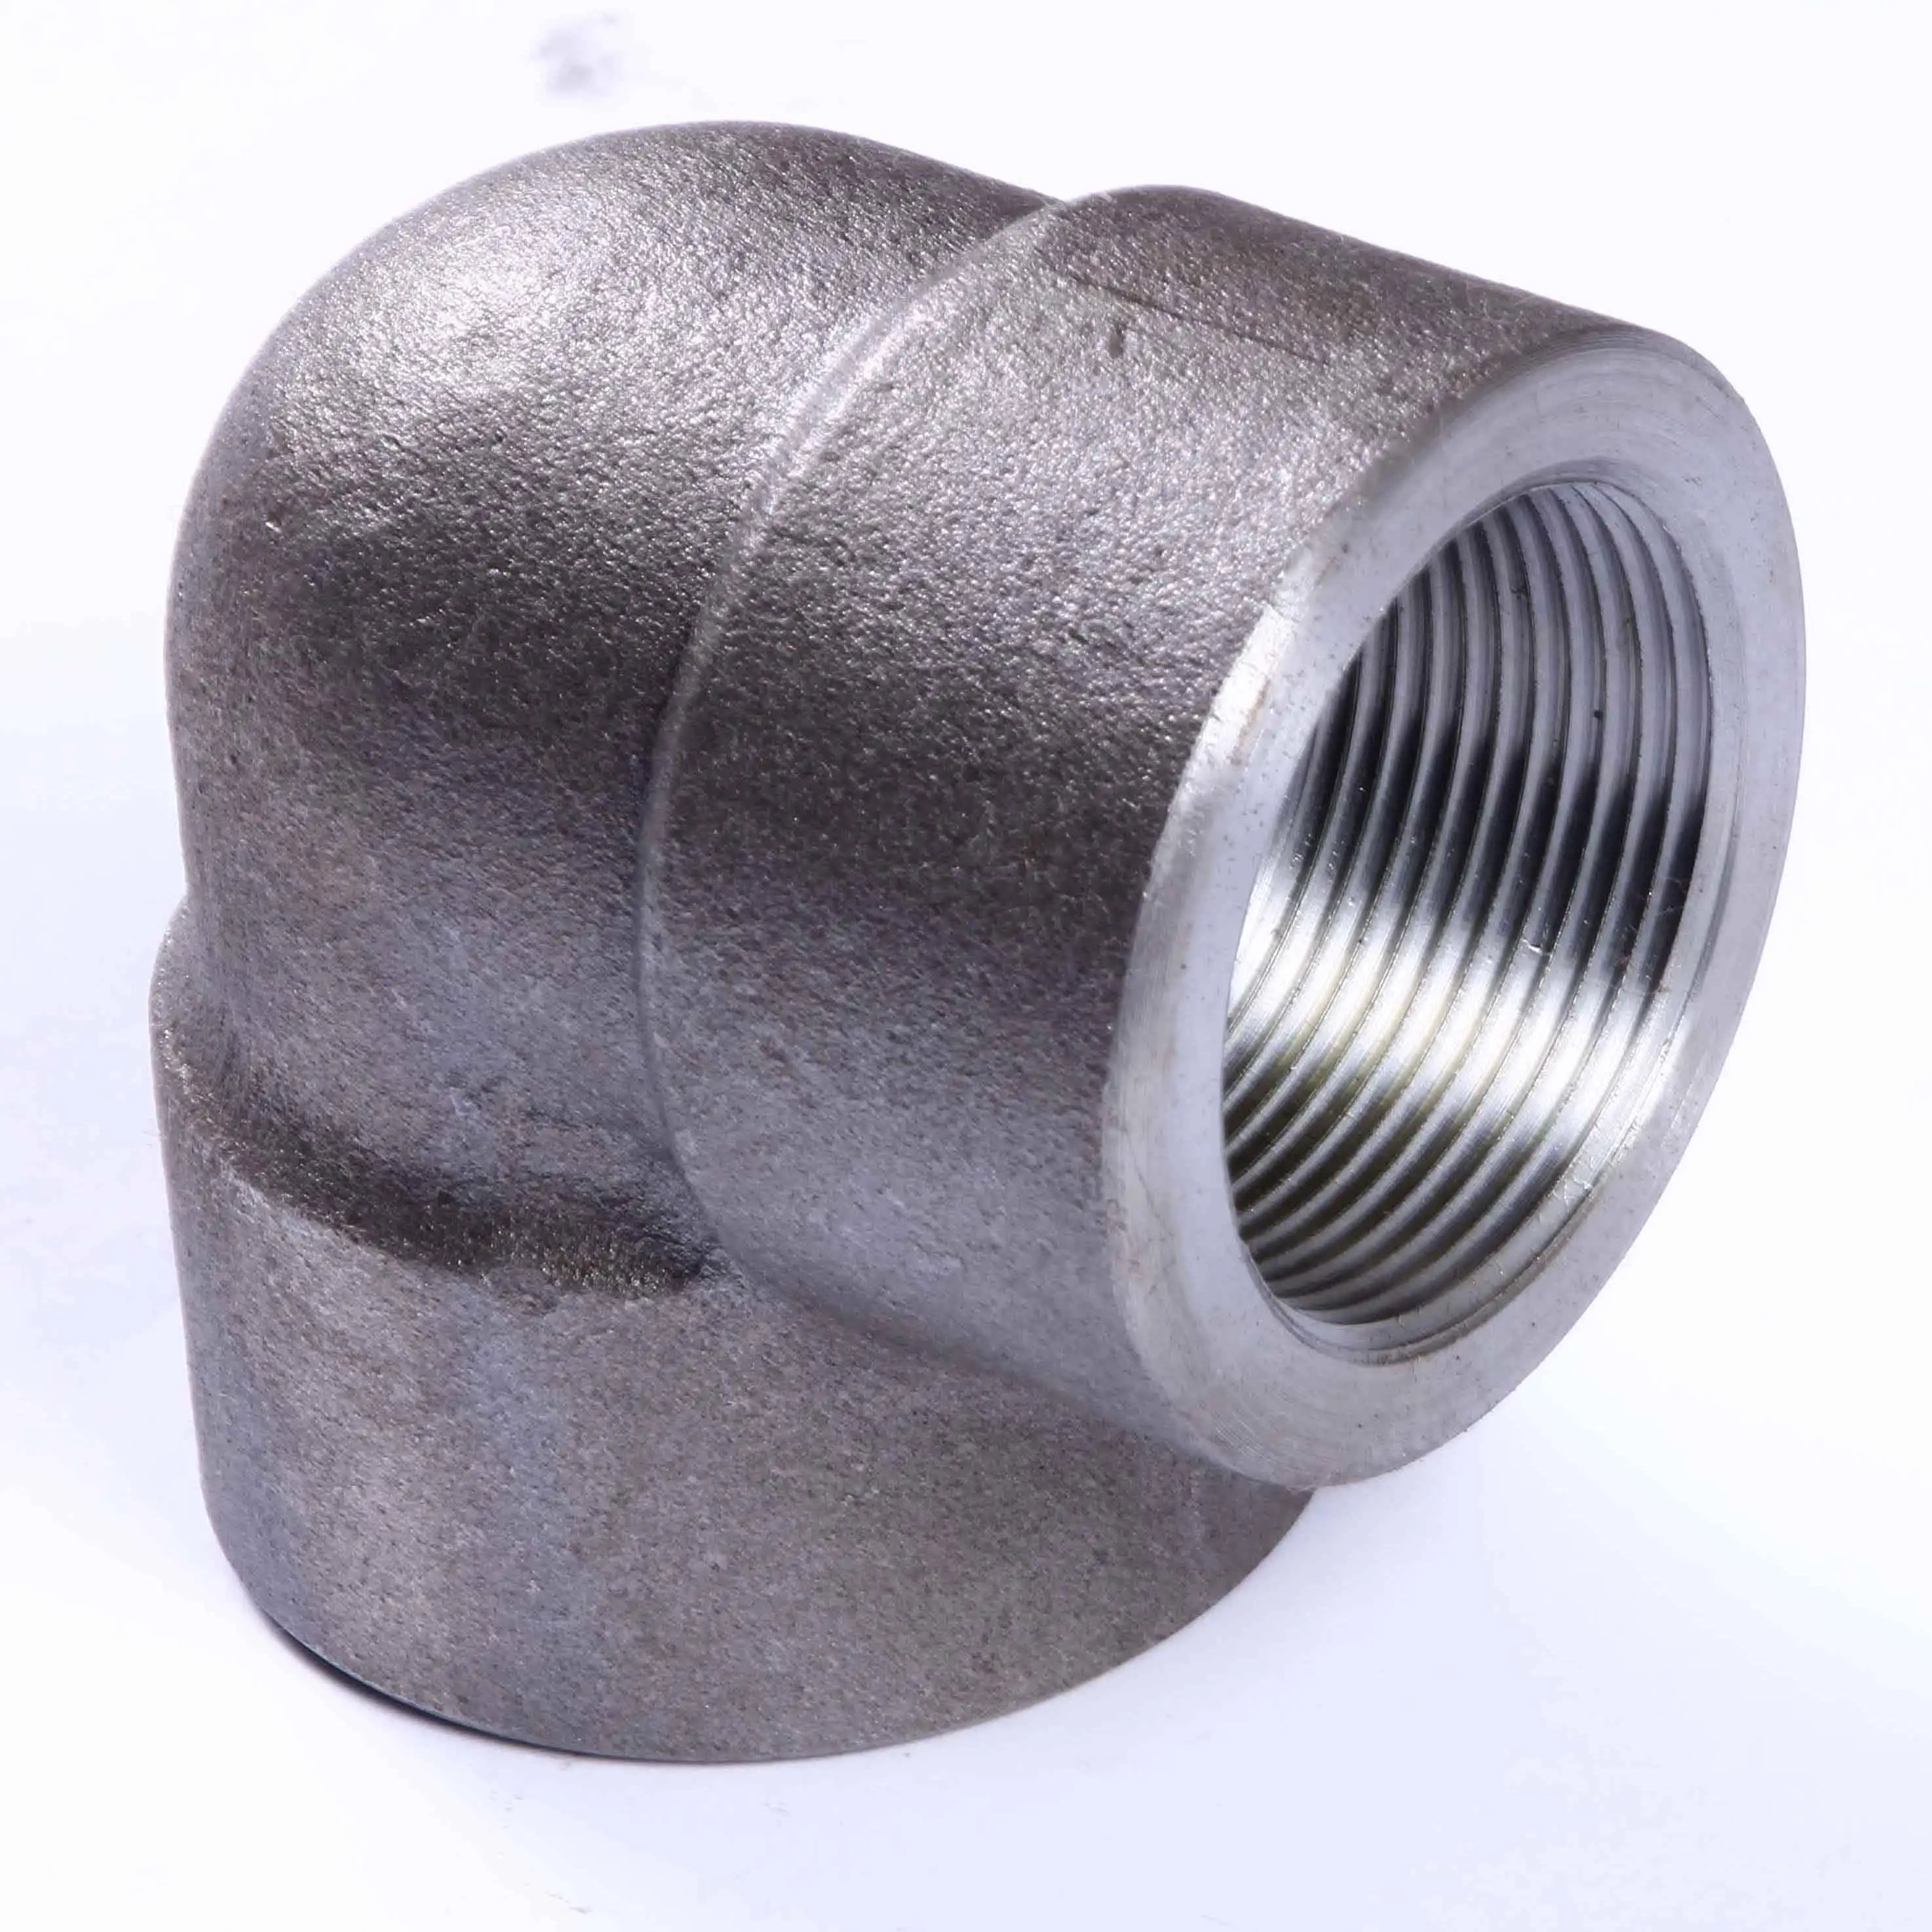 ASME B16.11 Forged Pipe Fittings 3000 LB SUS 304 / A105 SW Socket Weld or Threaded 45 Degree Elbow